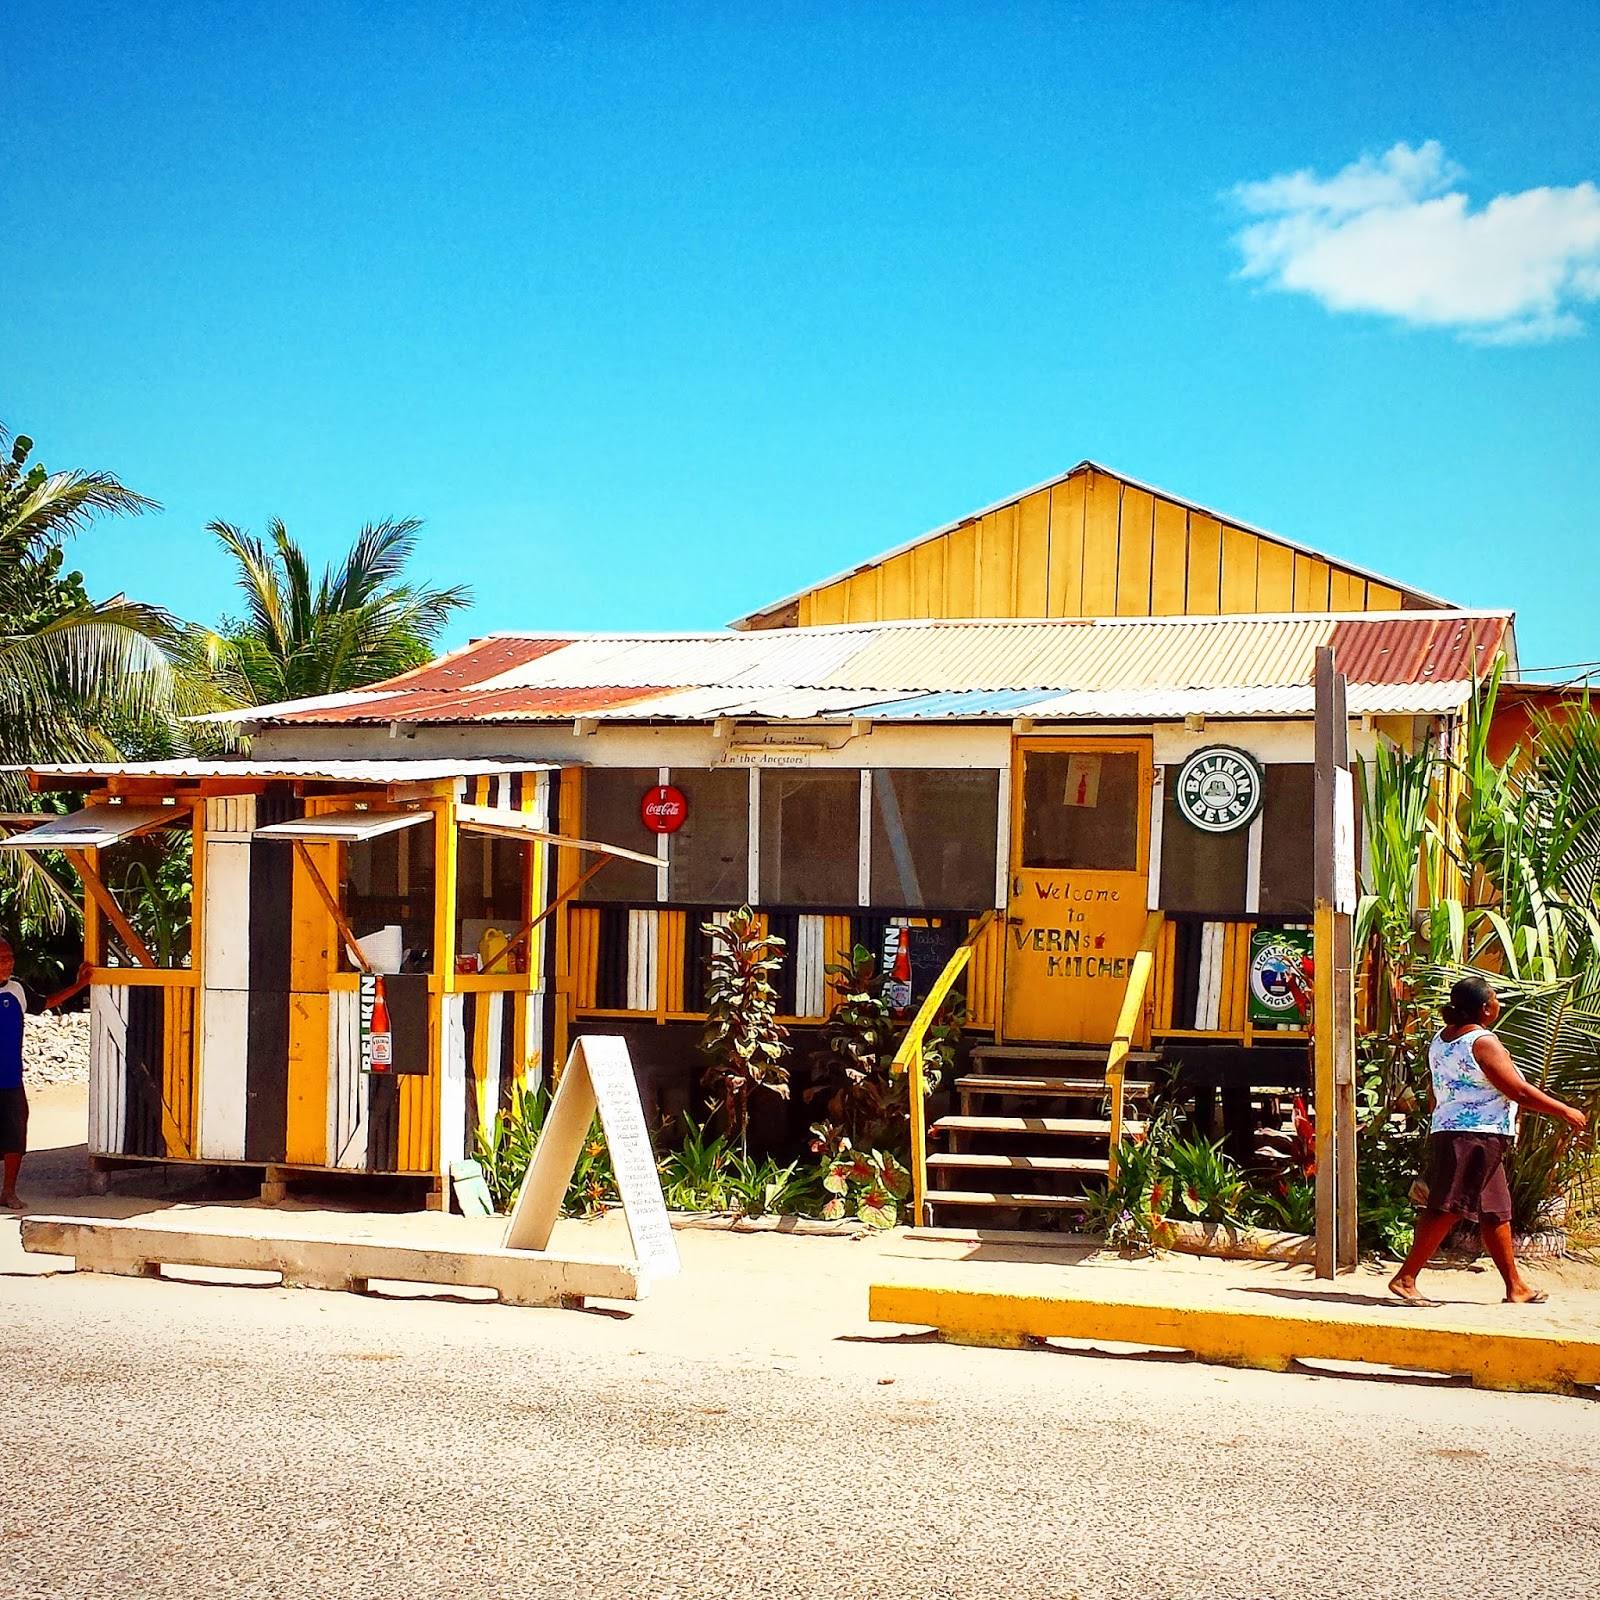 Remax Vip Belize: Authentic Goodness at Vern's kitchen